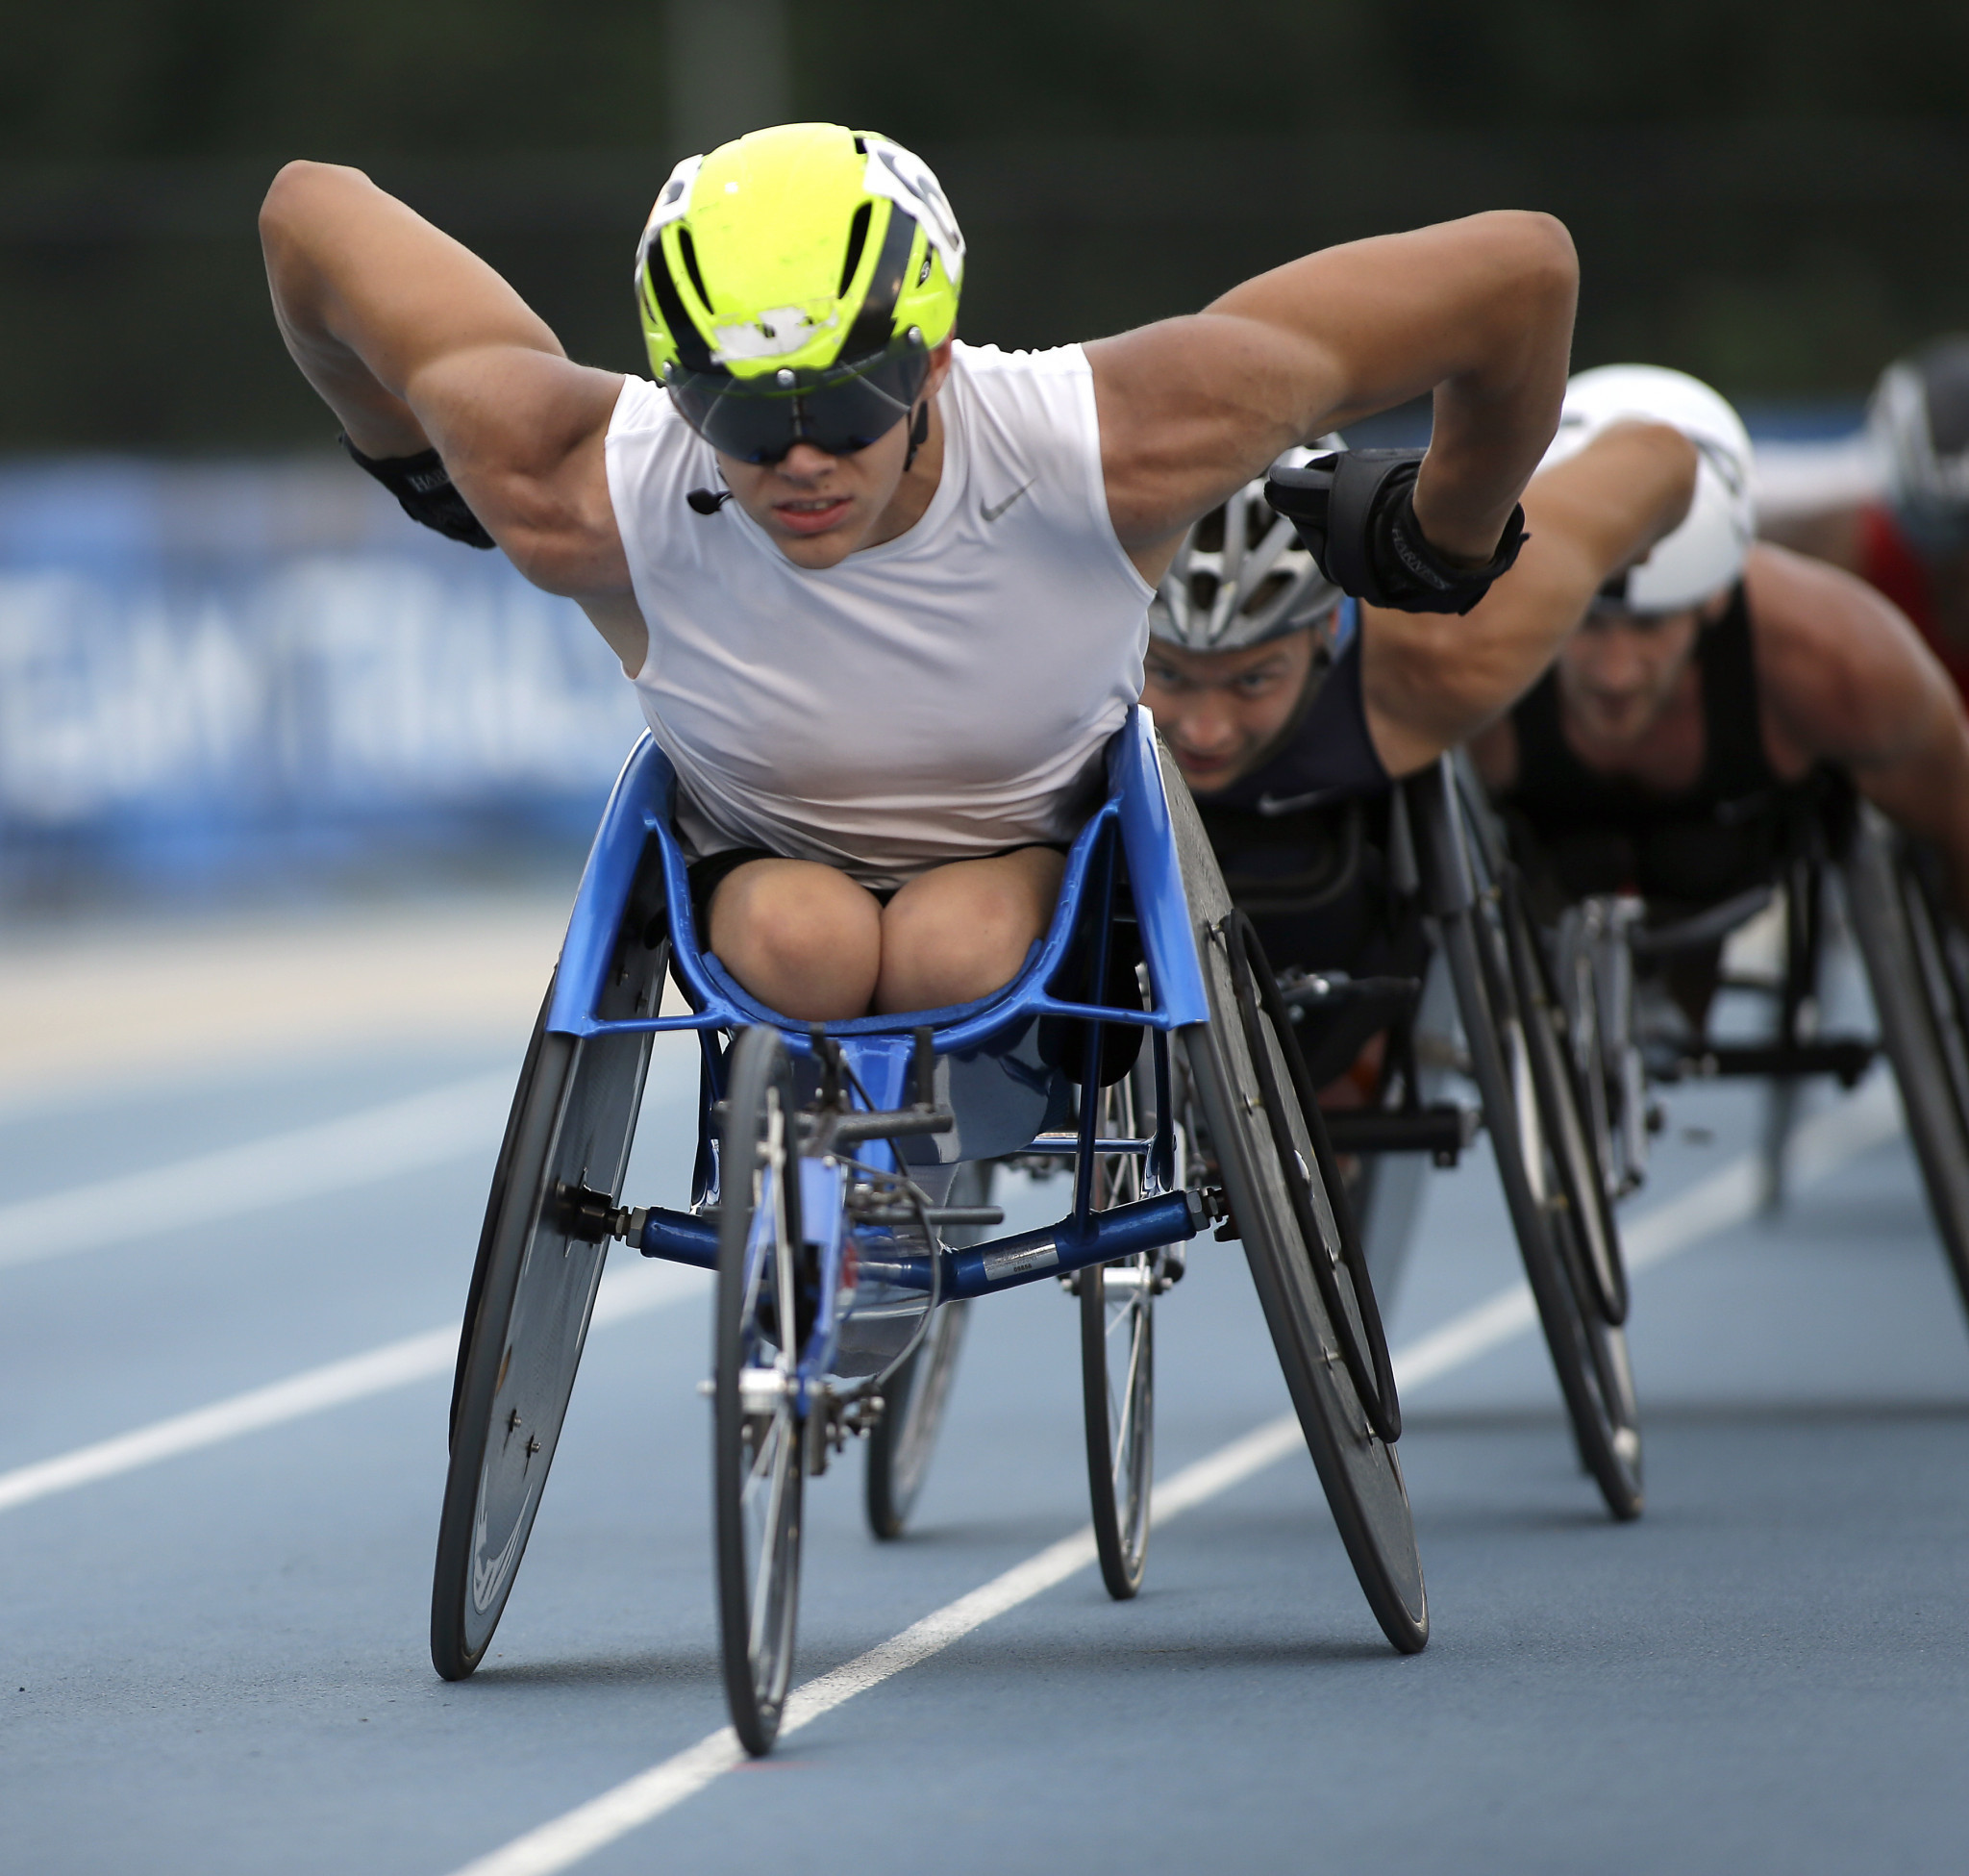 Daniel Romanchuk followed up his T54 800m world record by winning two more titles at the World Para Athletics Grand Prix in Arizona over 400 and 1,500m ©Getty Images  